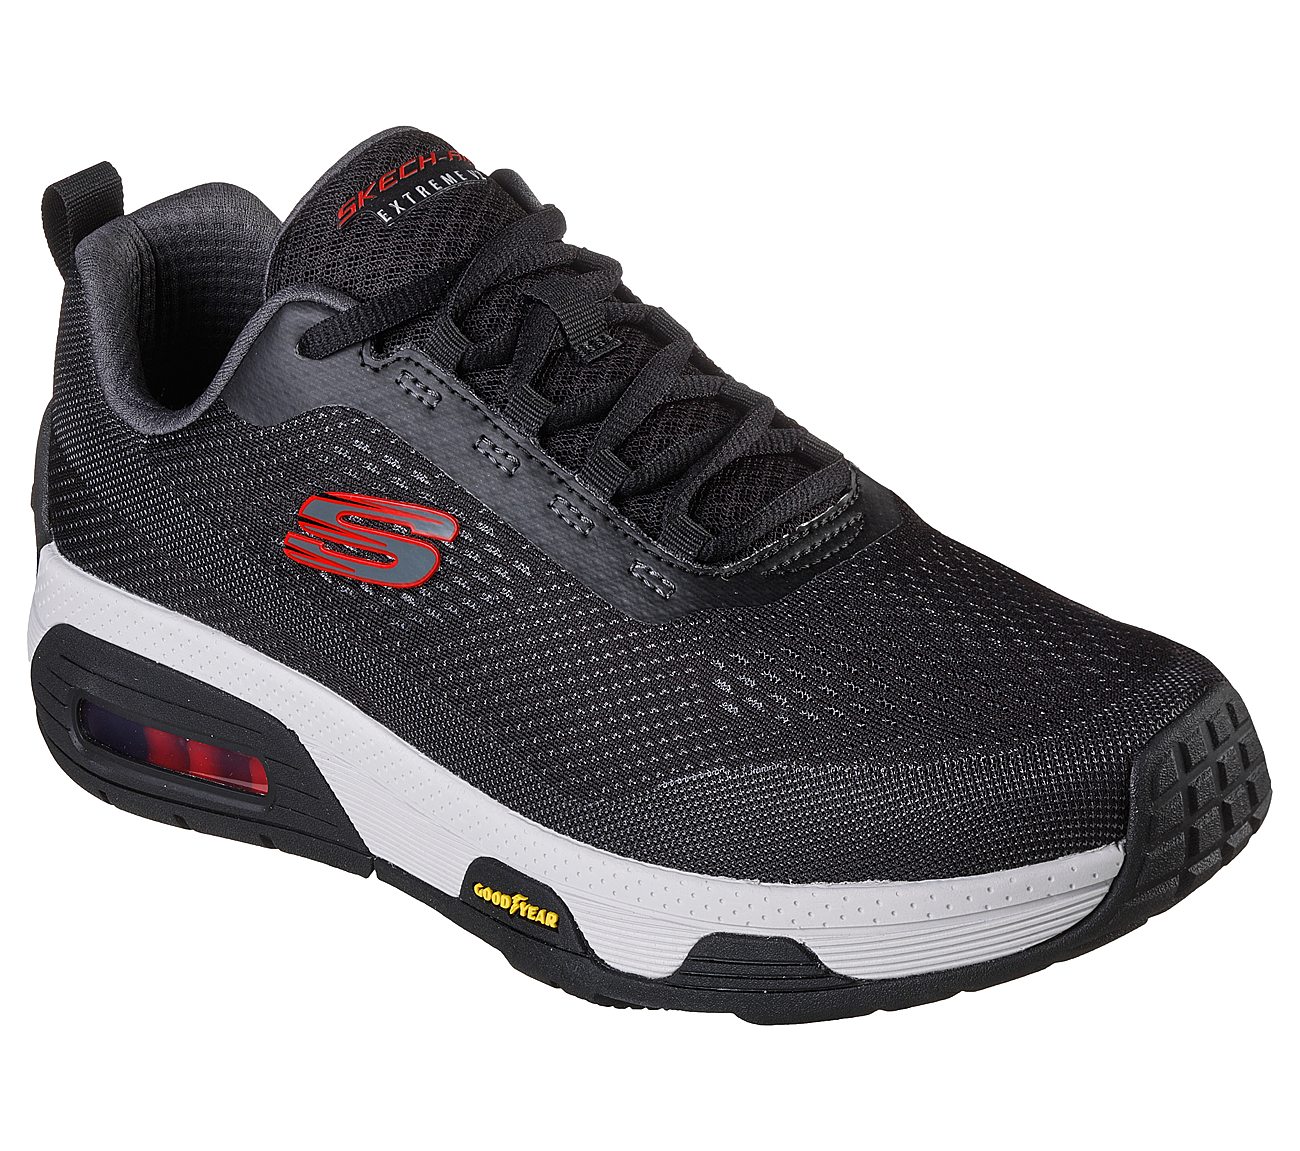 SKECH-AIR EXTREME V2 - TRIDEN, BLACK/RED Footwear Right View